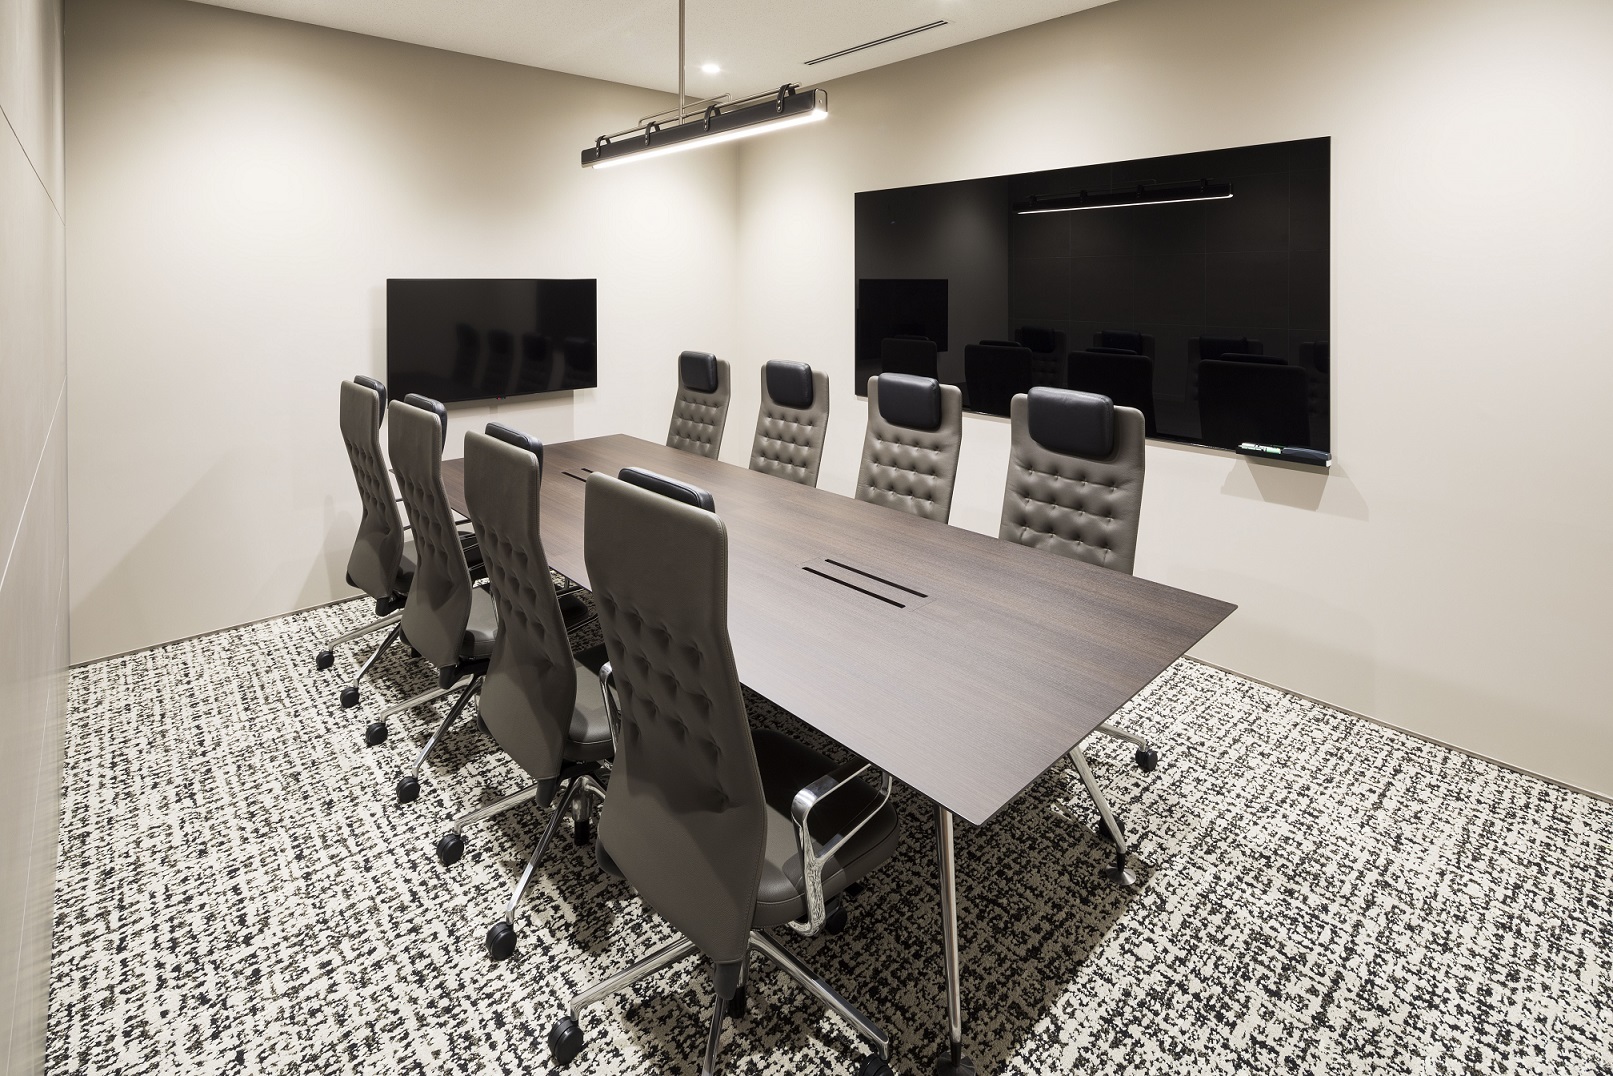 Conference rooms are equipped with monitors for videoconferencing and other uses. Can be used for a wide range of purposes *Image